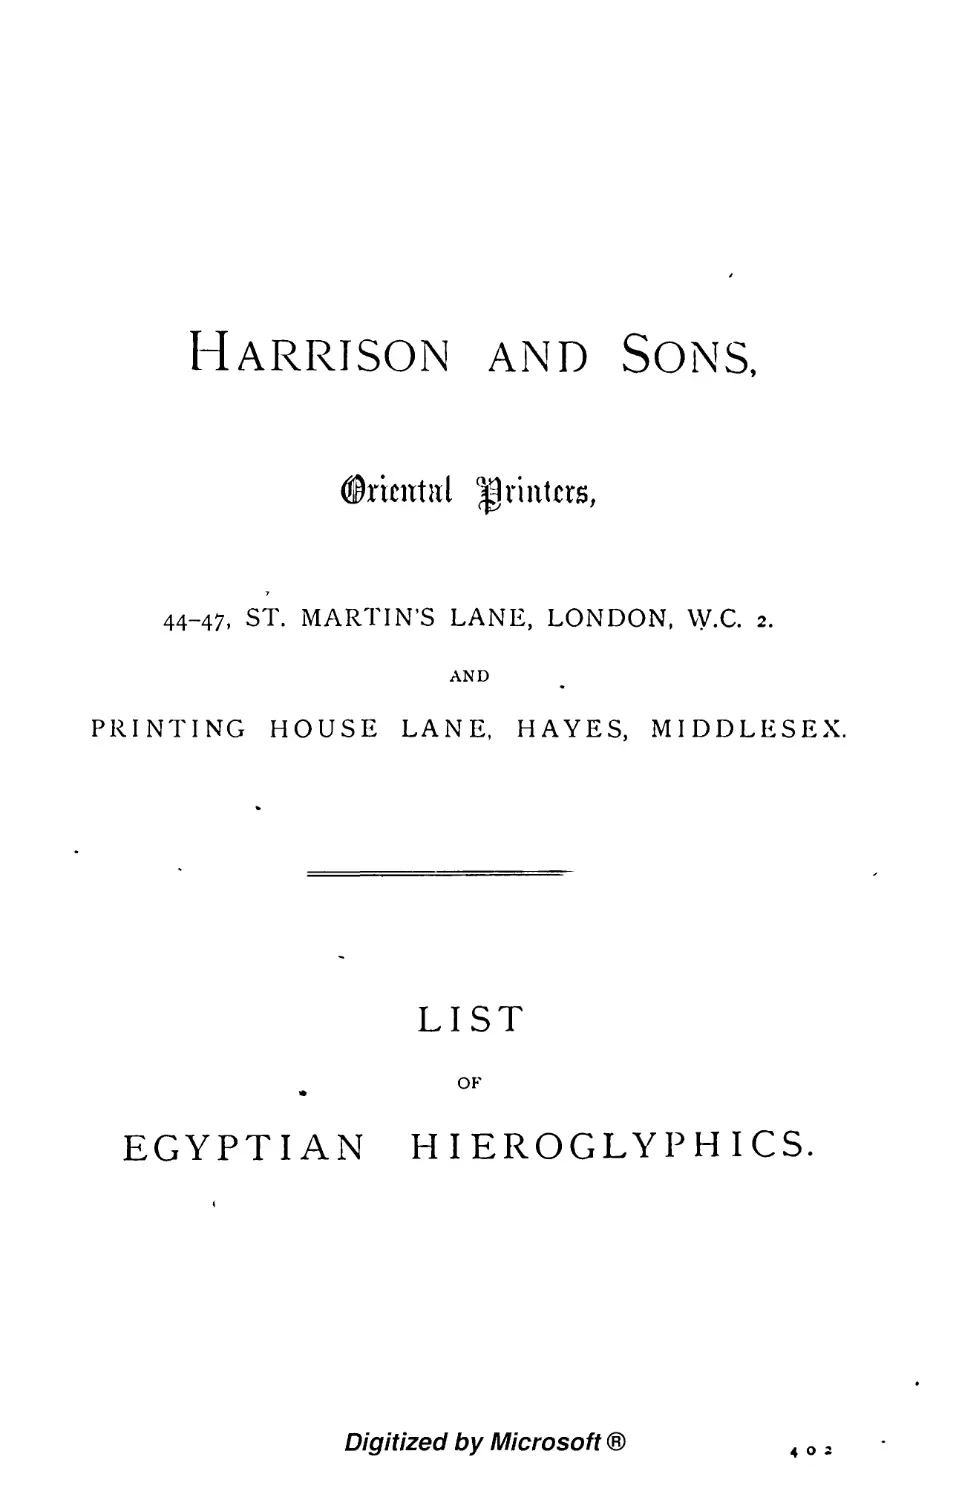 List of Egyptian Hieroglyphic Characters in the Fount of Messrs. Harrison and Sons; with Appendix